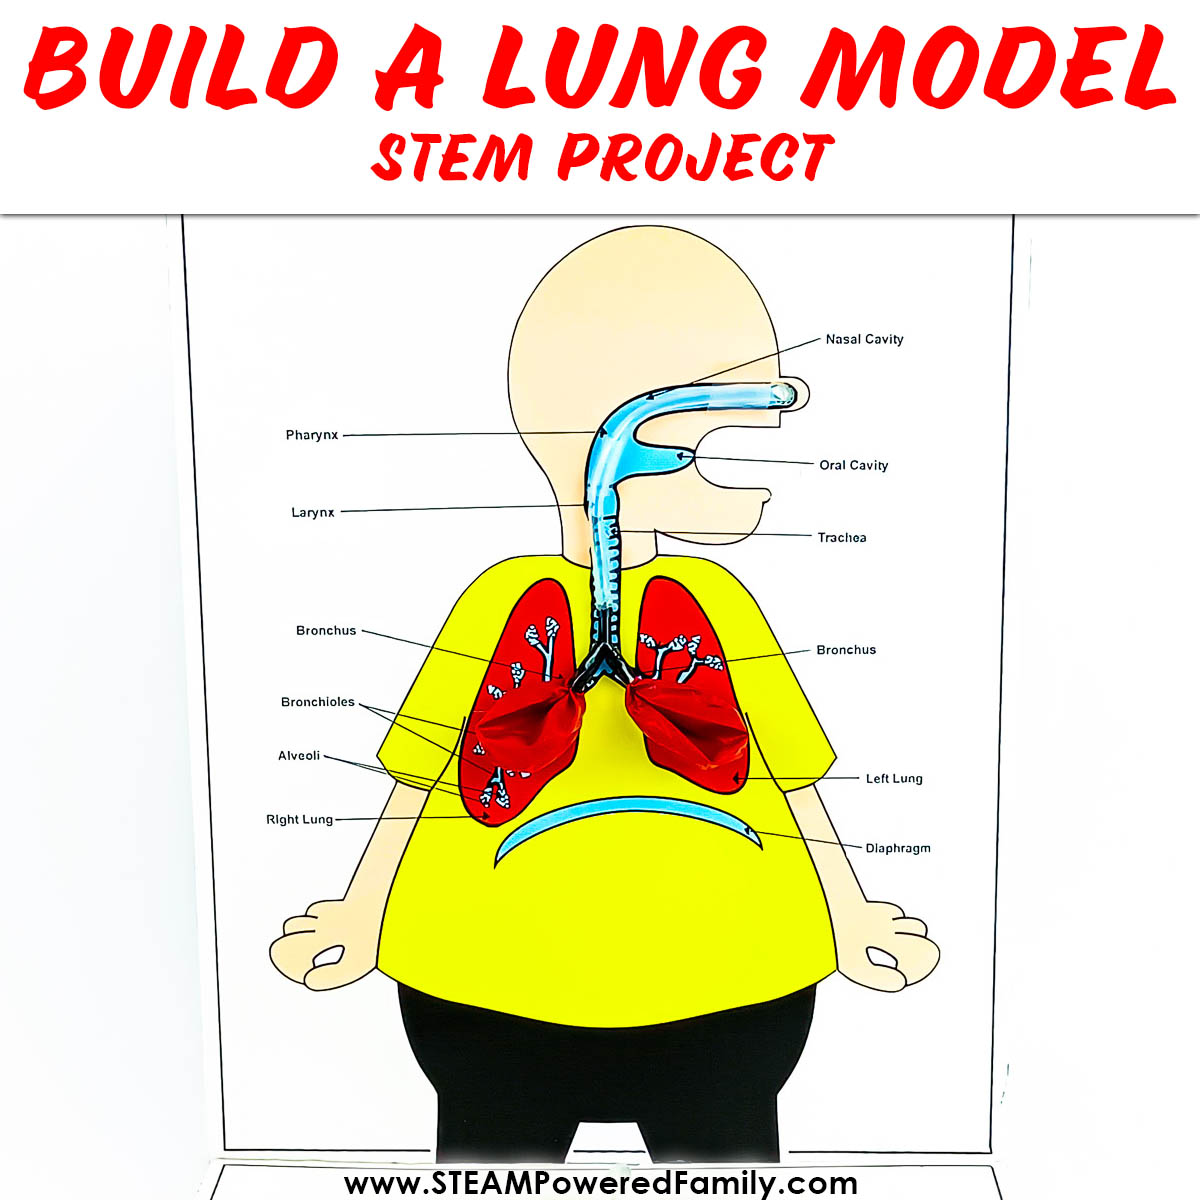 Build a Lung Model